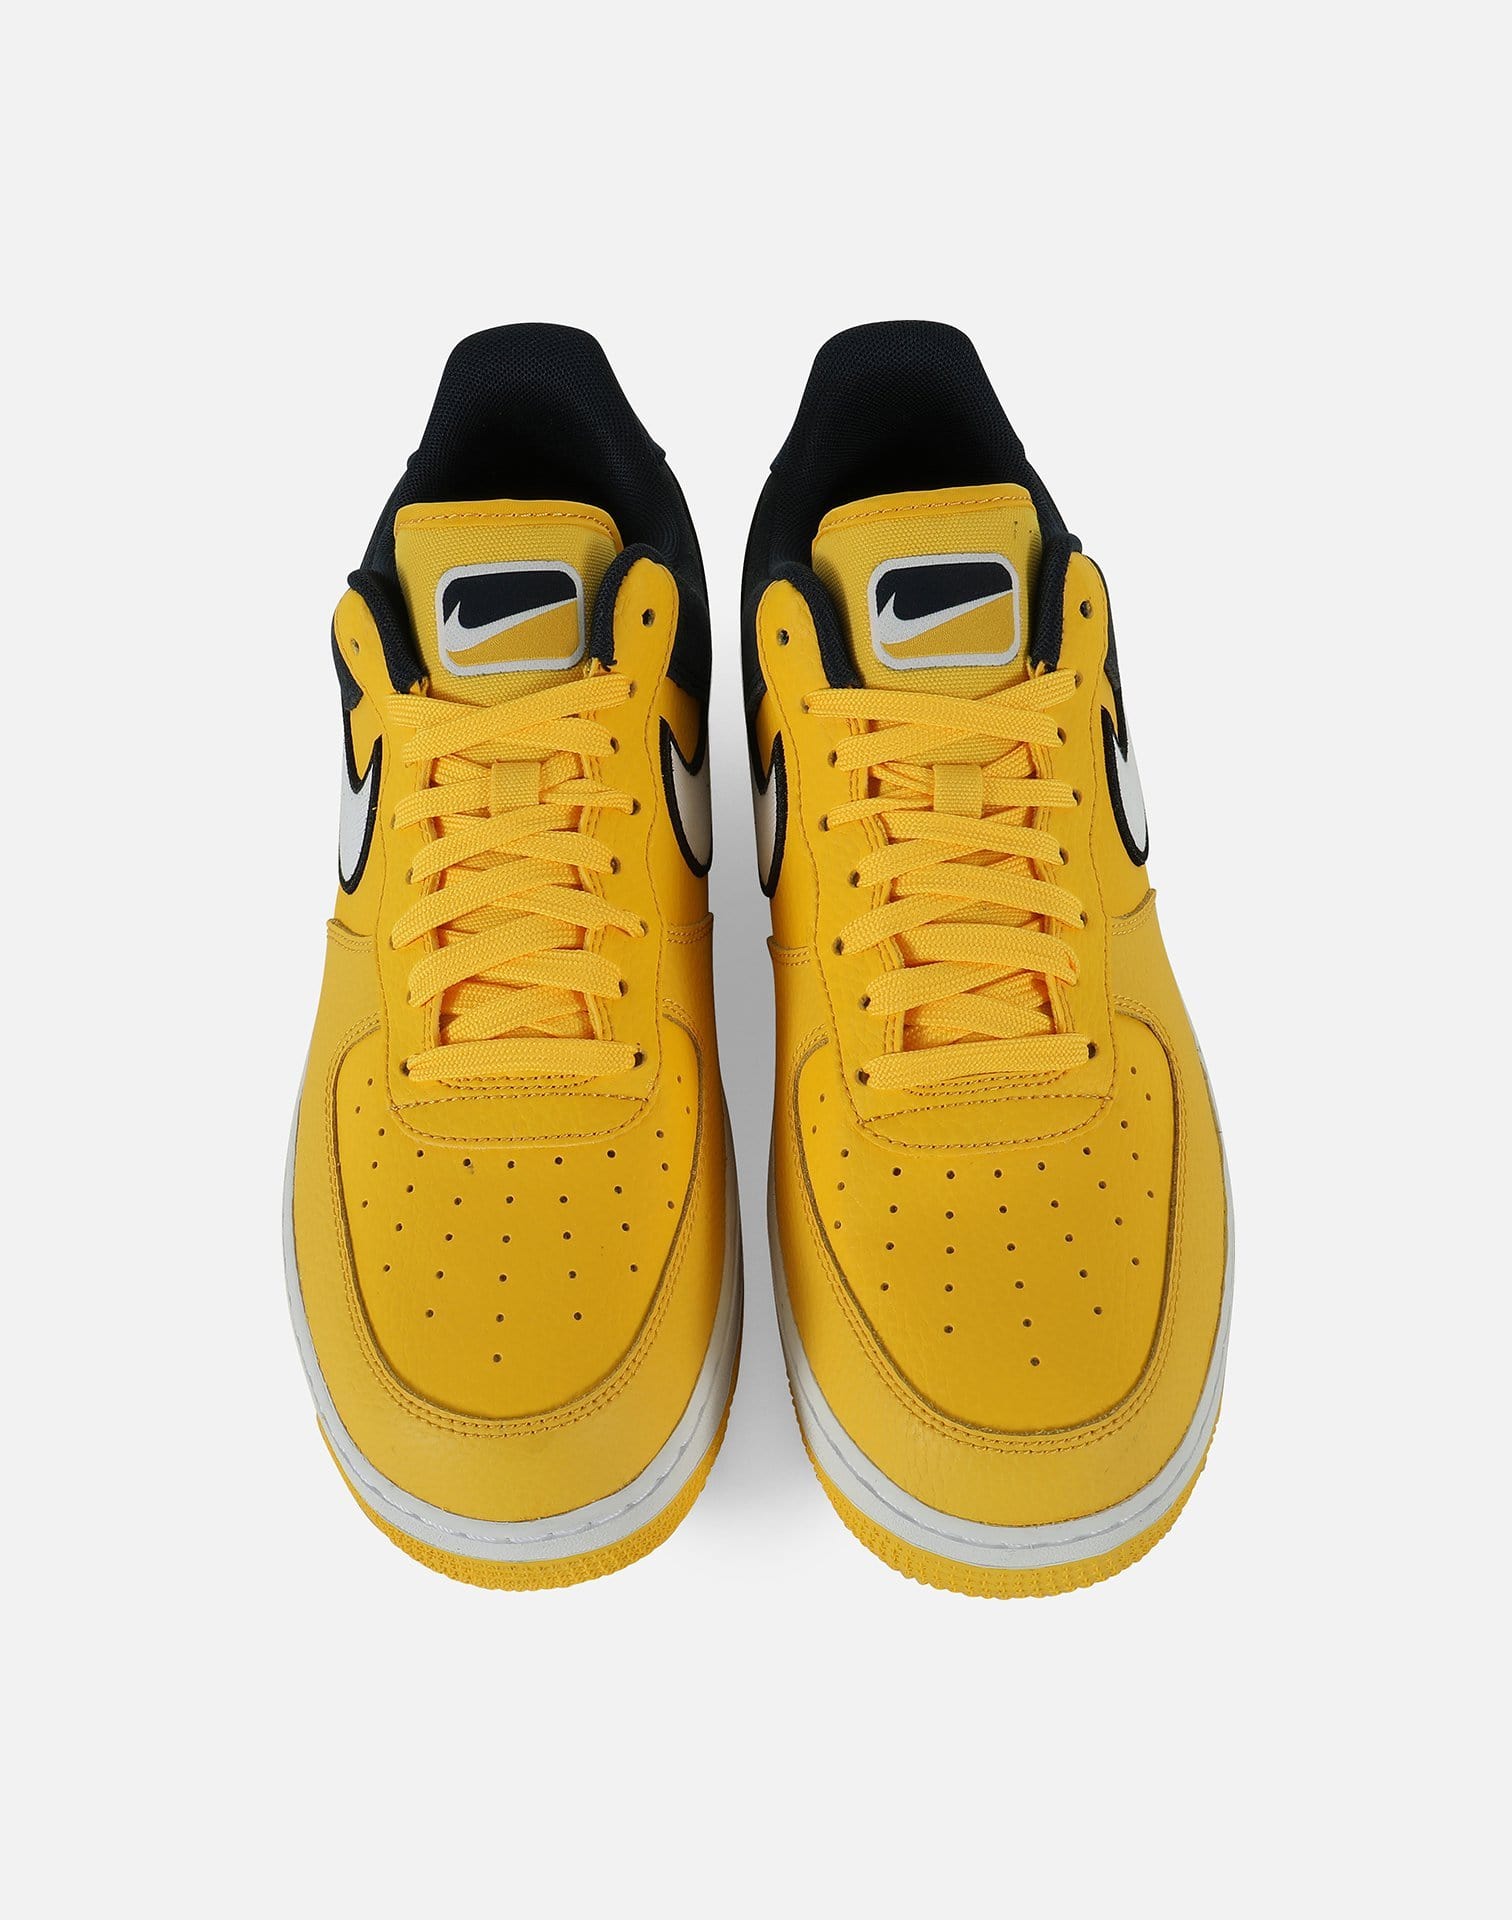 Nike Air Force 1 07 LV8 Ore AO2425-200 from 247,00 €